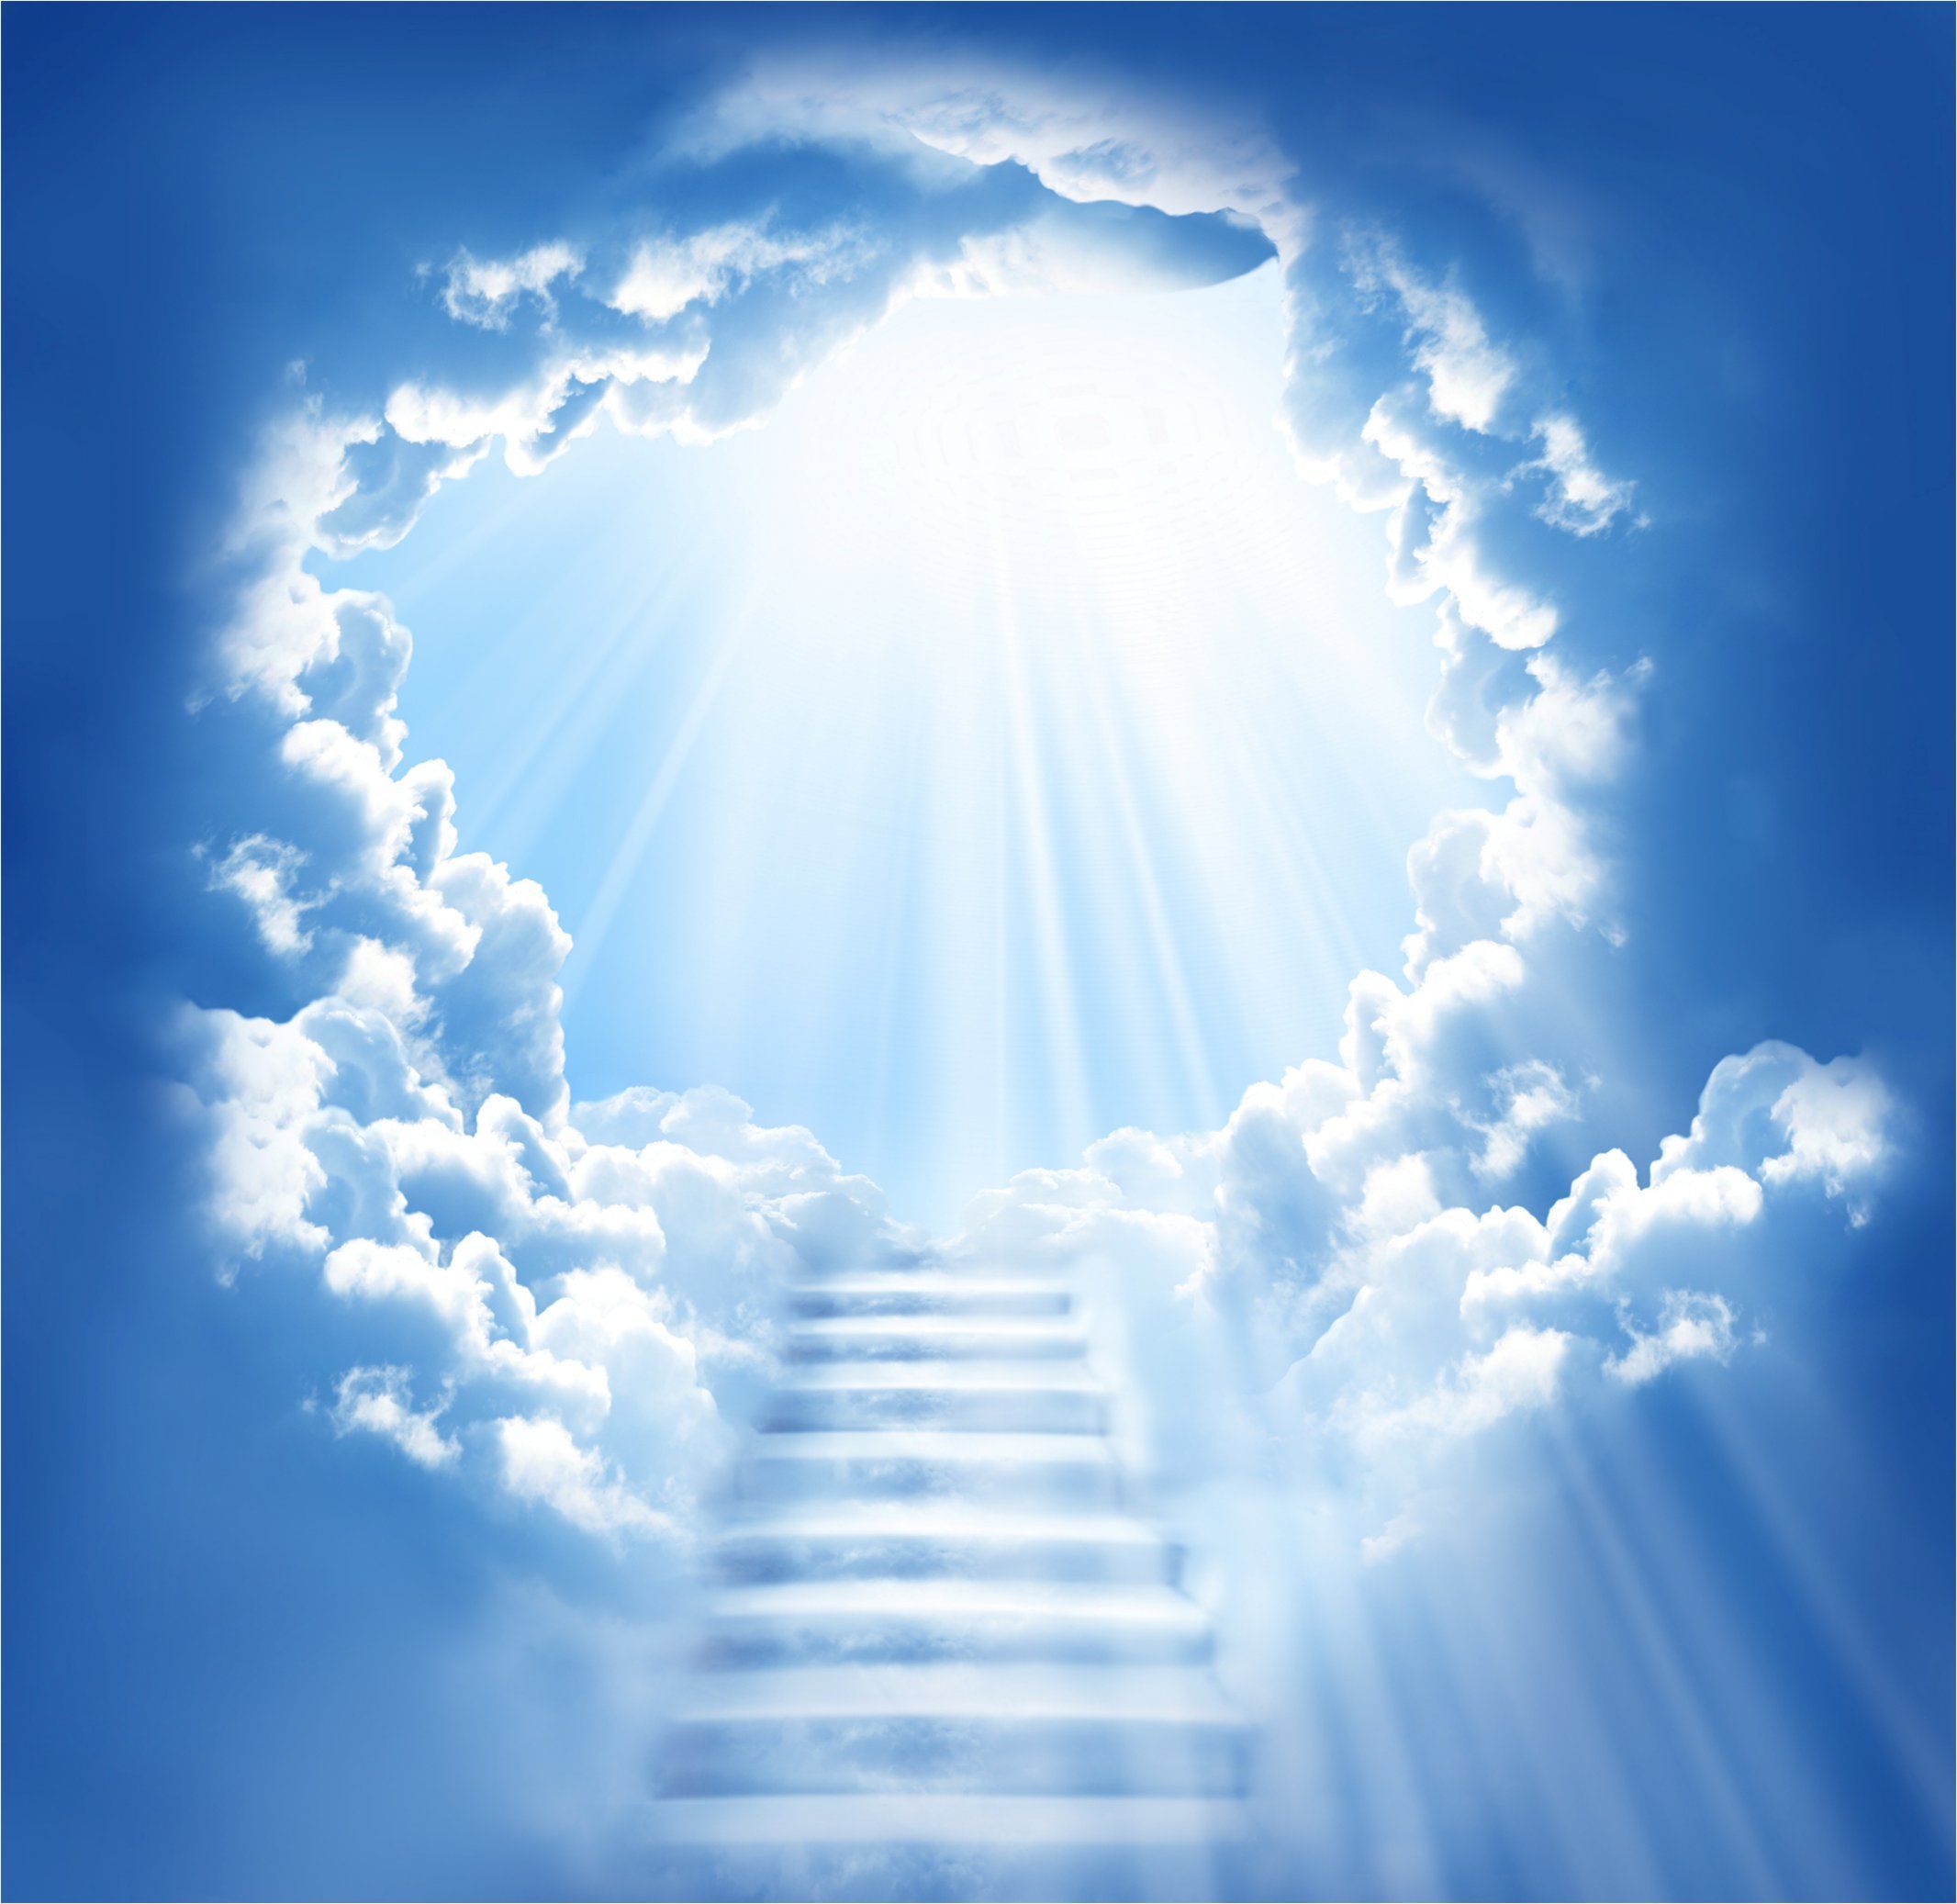 Funeral Clouds Wallpaper Top Background